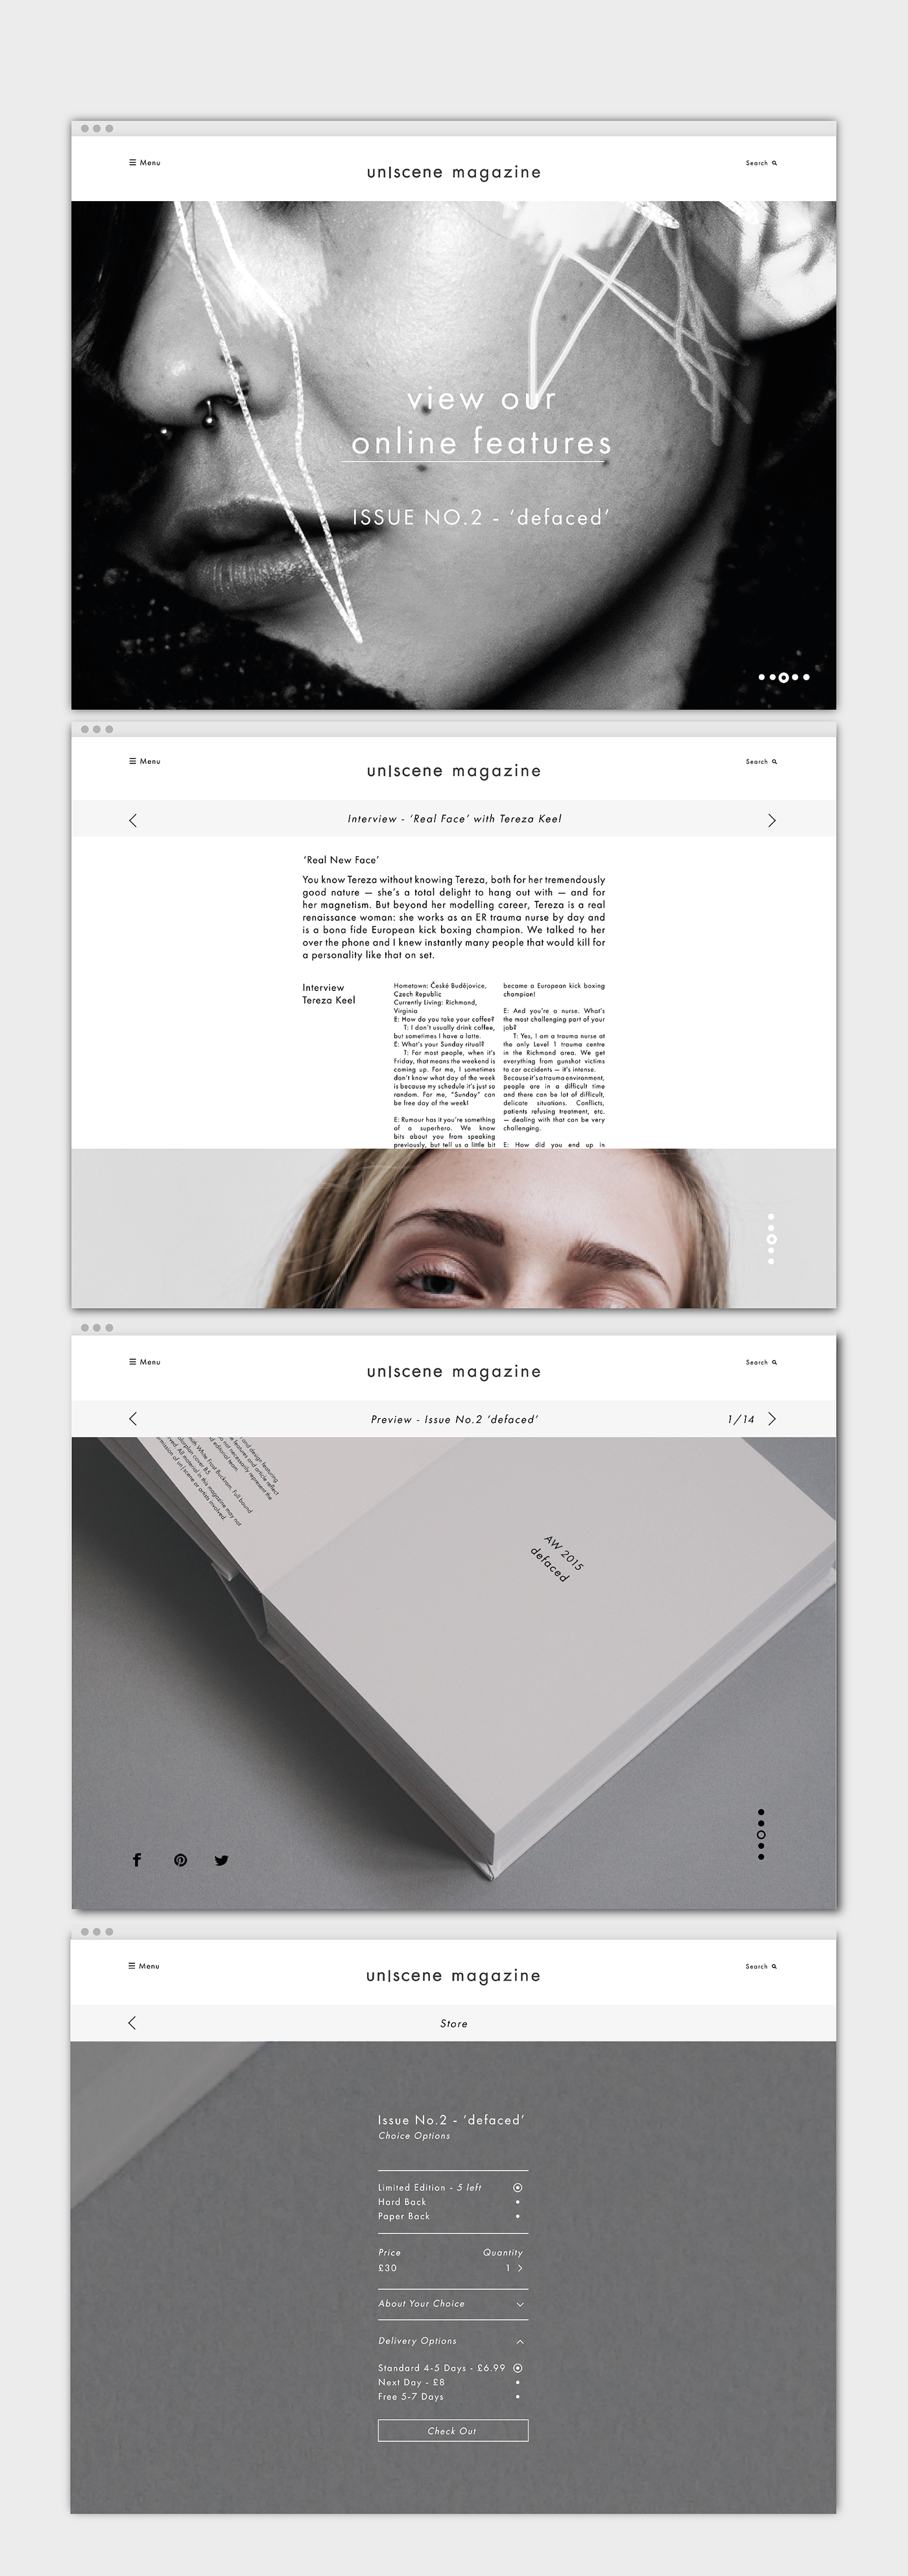 Web app mobile magazine limited edition Editoral Design cover fashion photography book emilygoater emily goater Lookbook